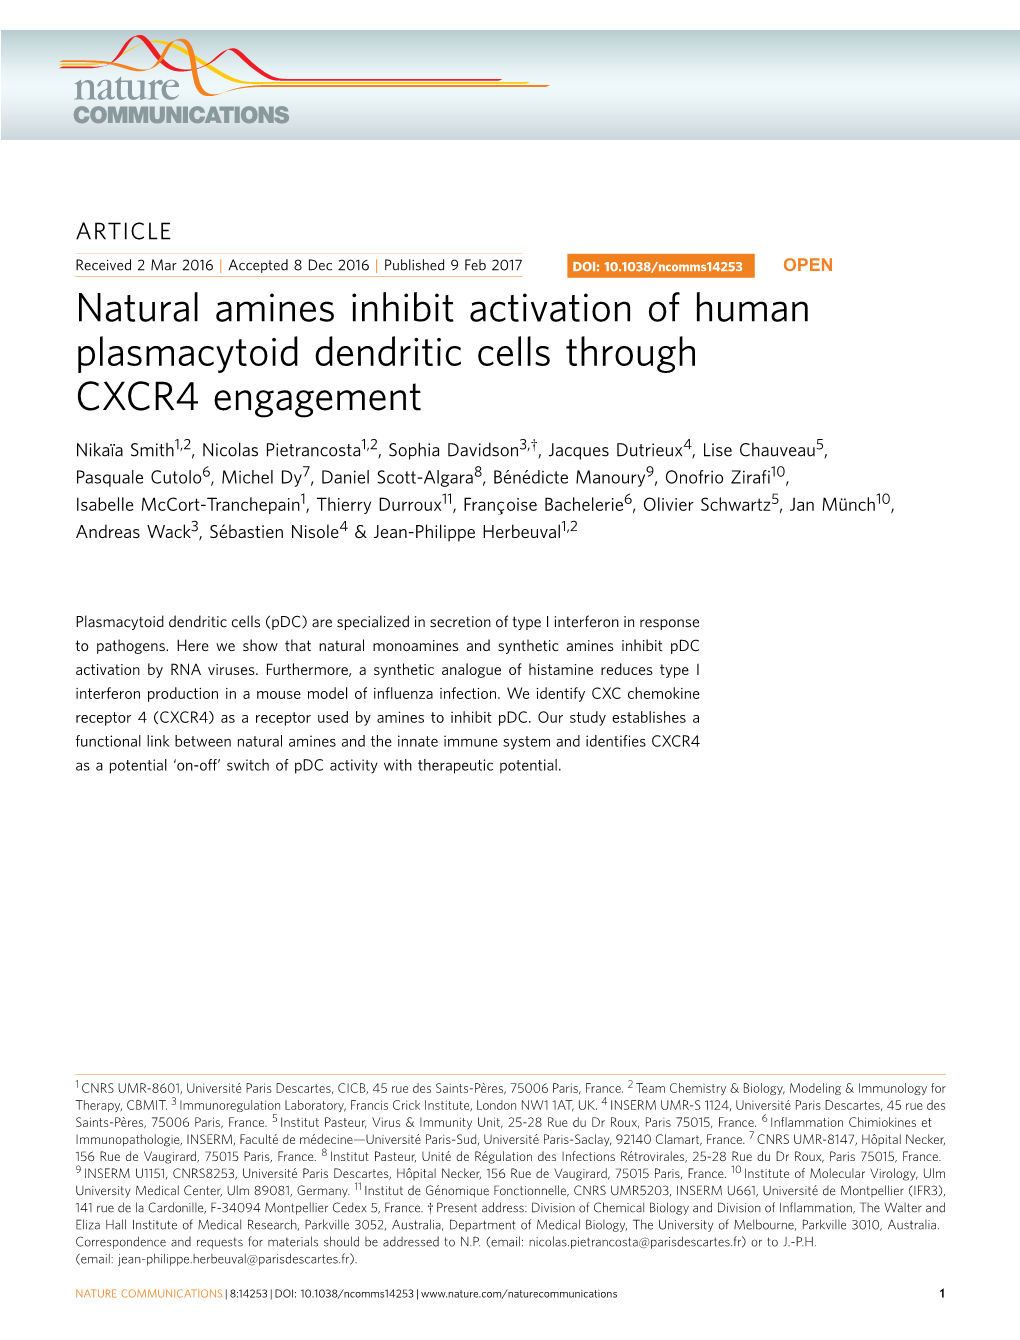 Natural Amines Inhibit Activation of Human Plasmacytoid Dendritic Cells Through CXCR4 Engagement